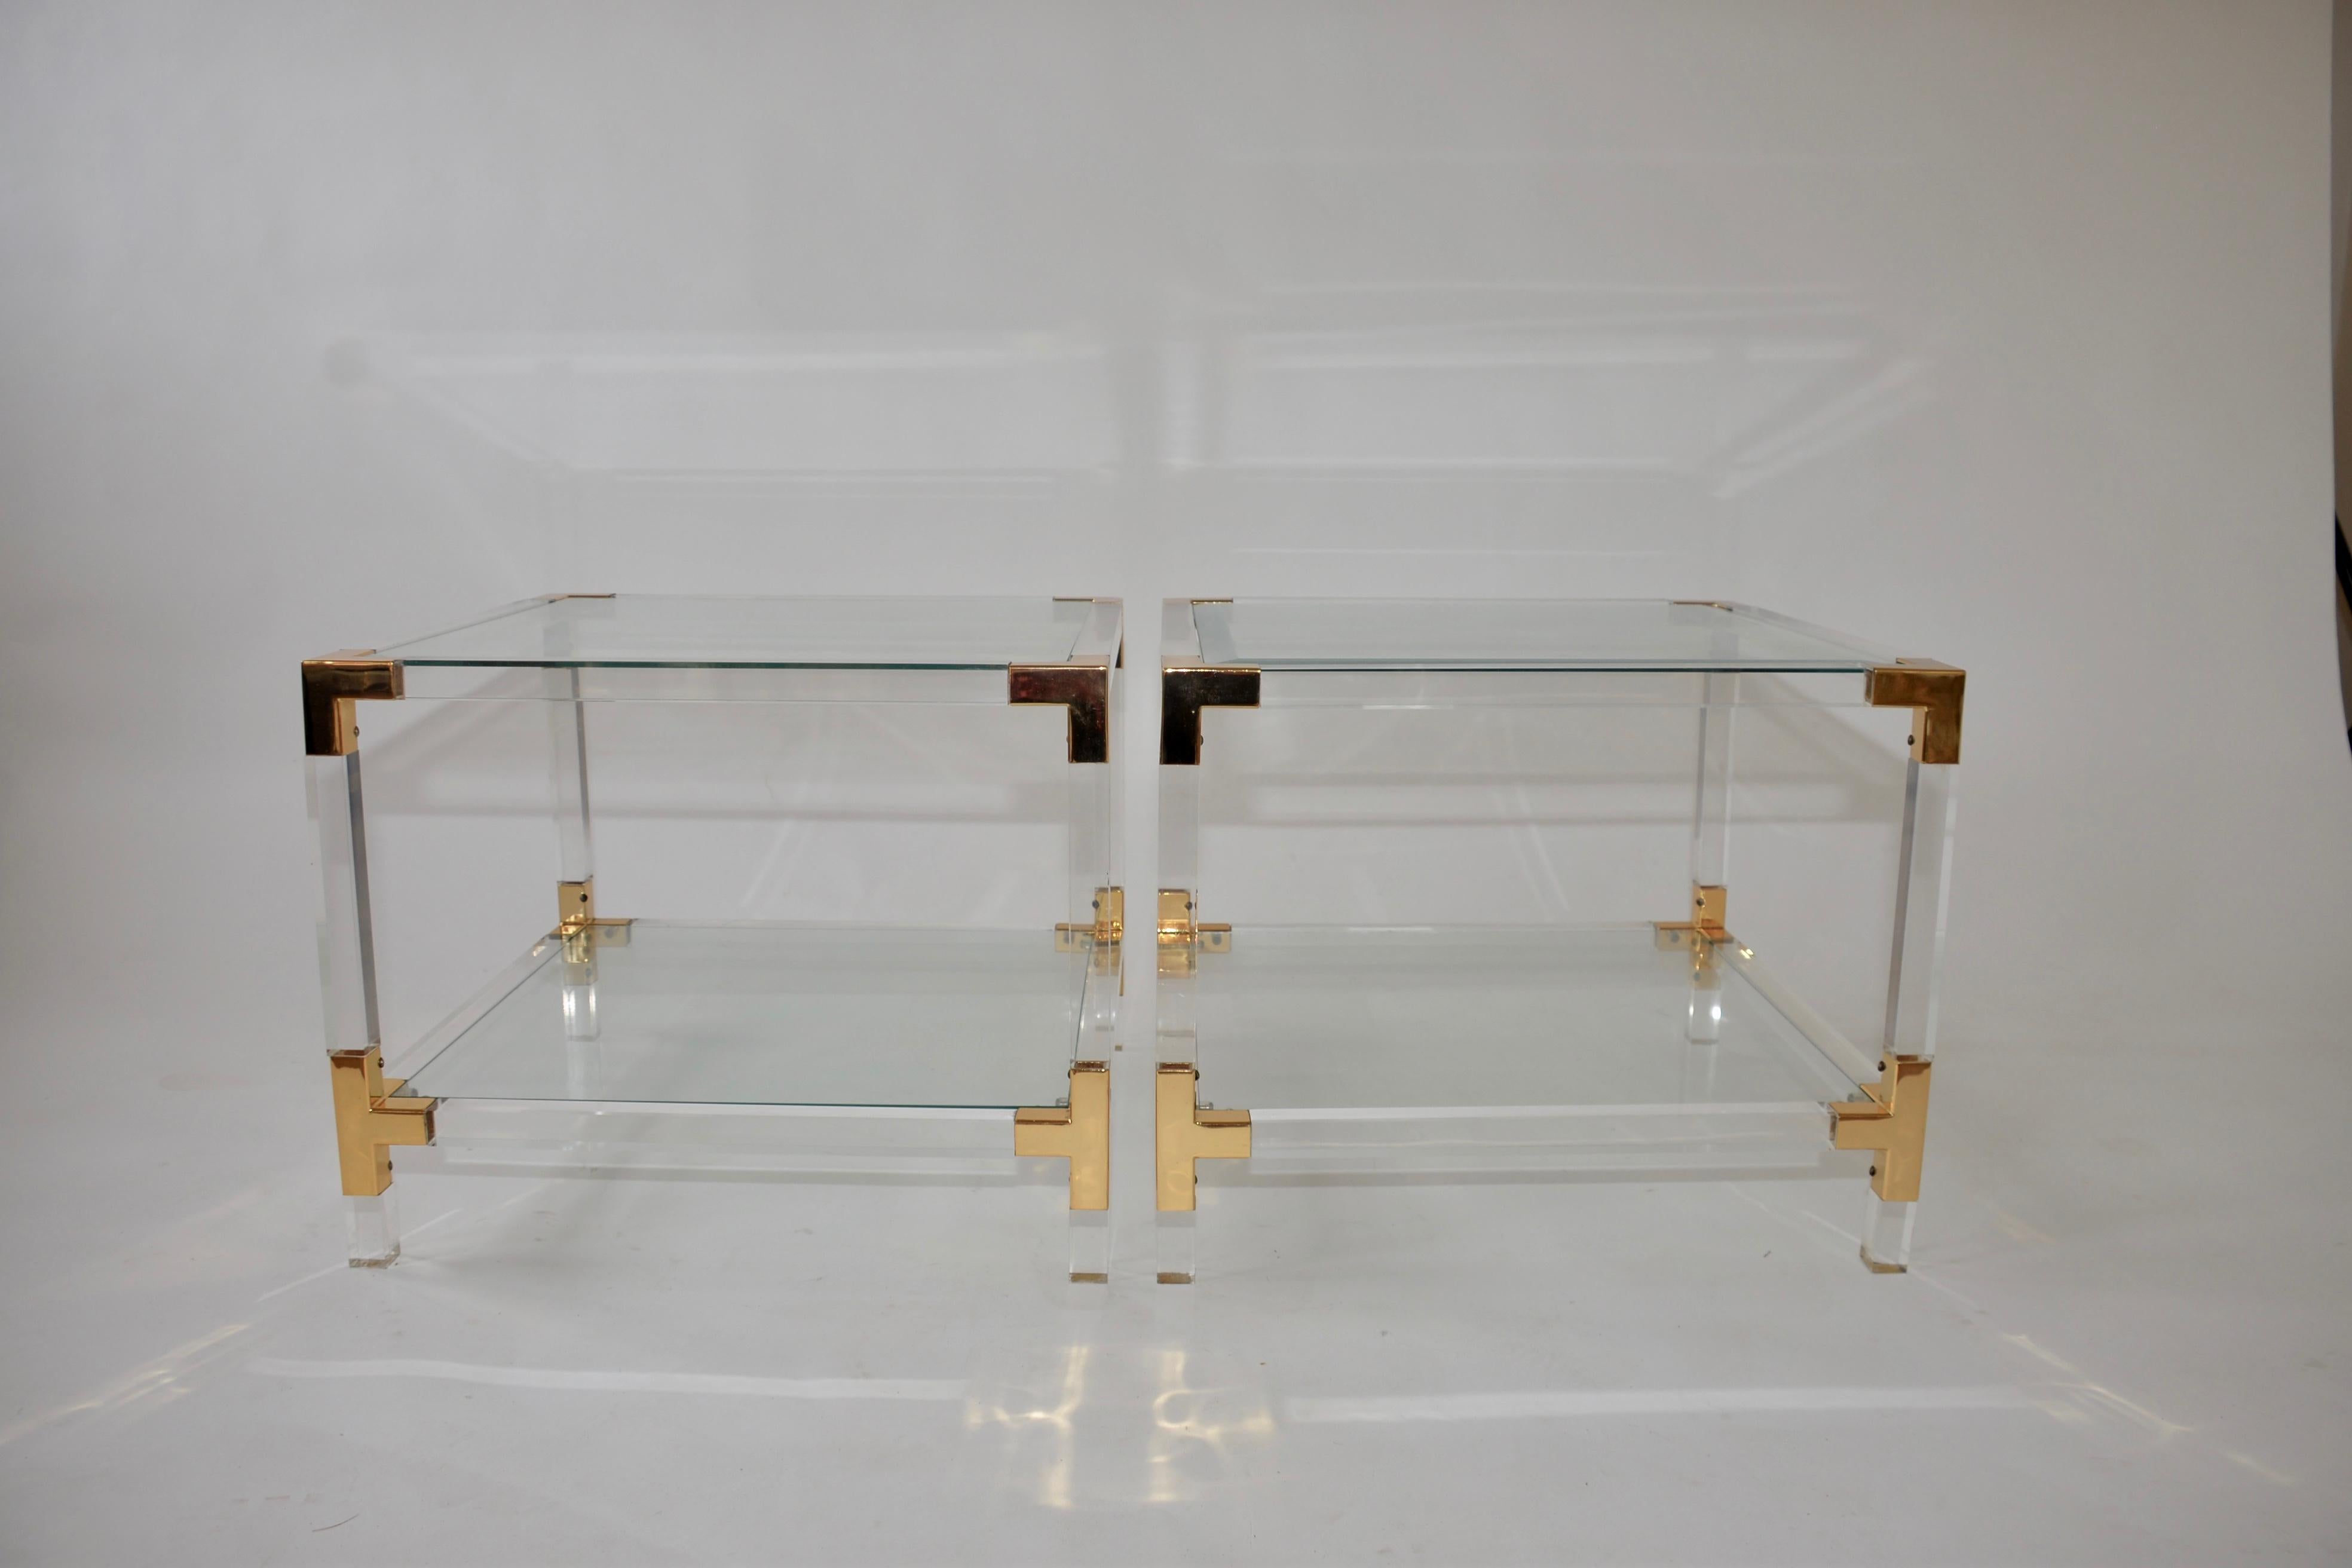 A pair of Lucite and glass Hollywood Regency side tables. The frames are Lucite with two glass shelves and the top shelf is beveled glass. Each corner is finished in brass plating.